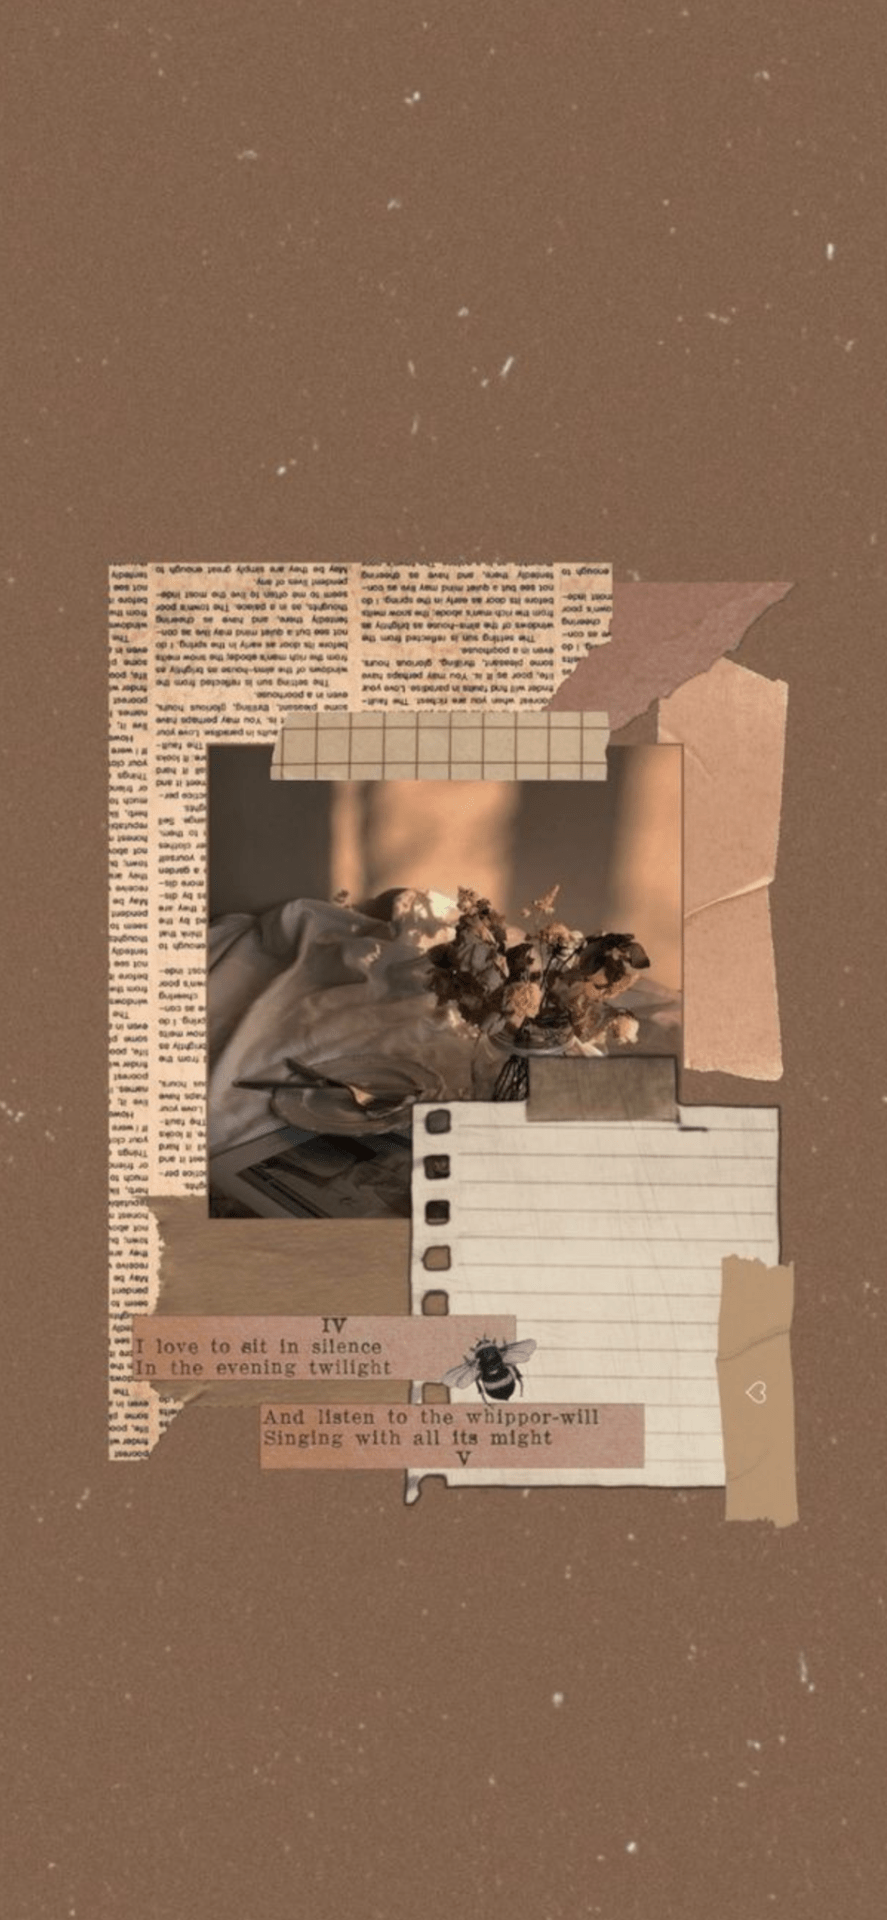 A collage of brown and white images including a quote, flowers, and a spider. - Light academia